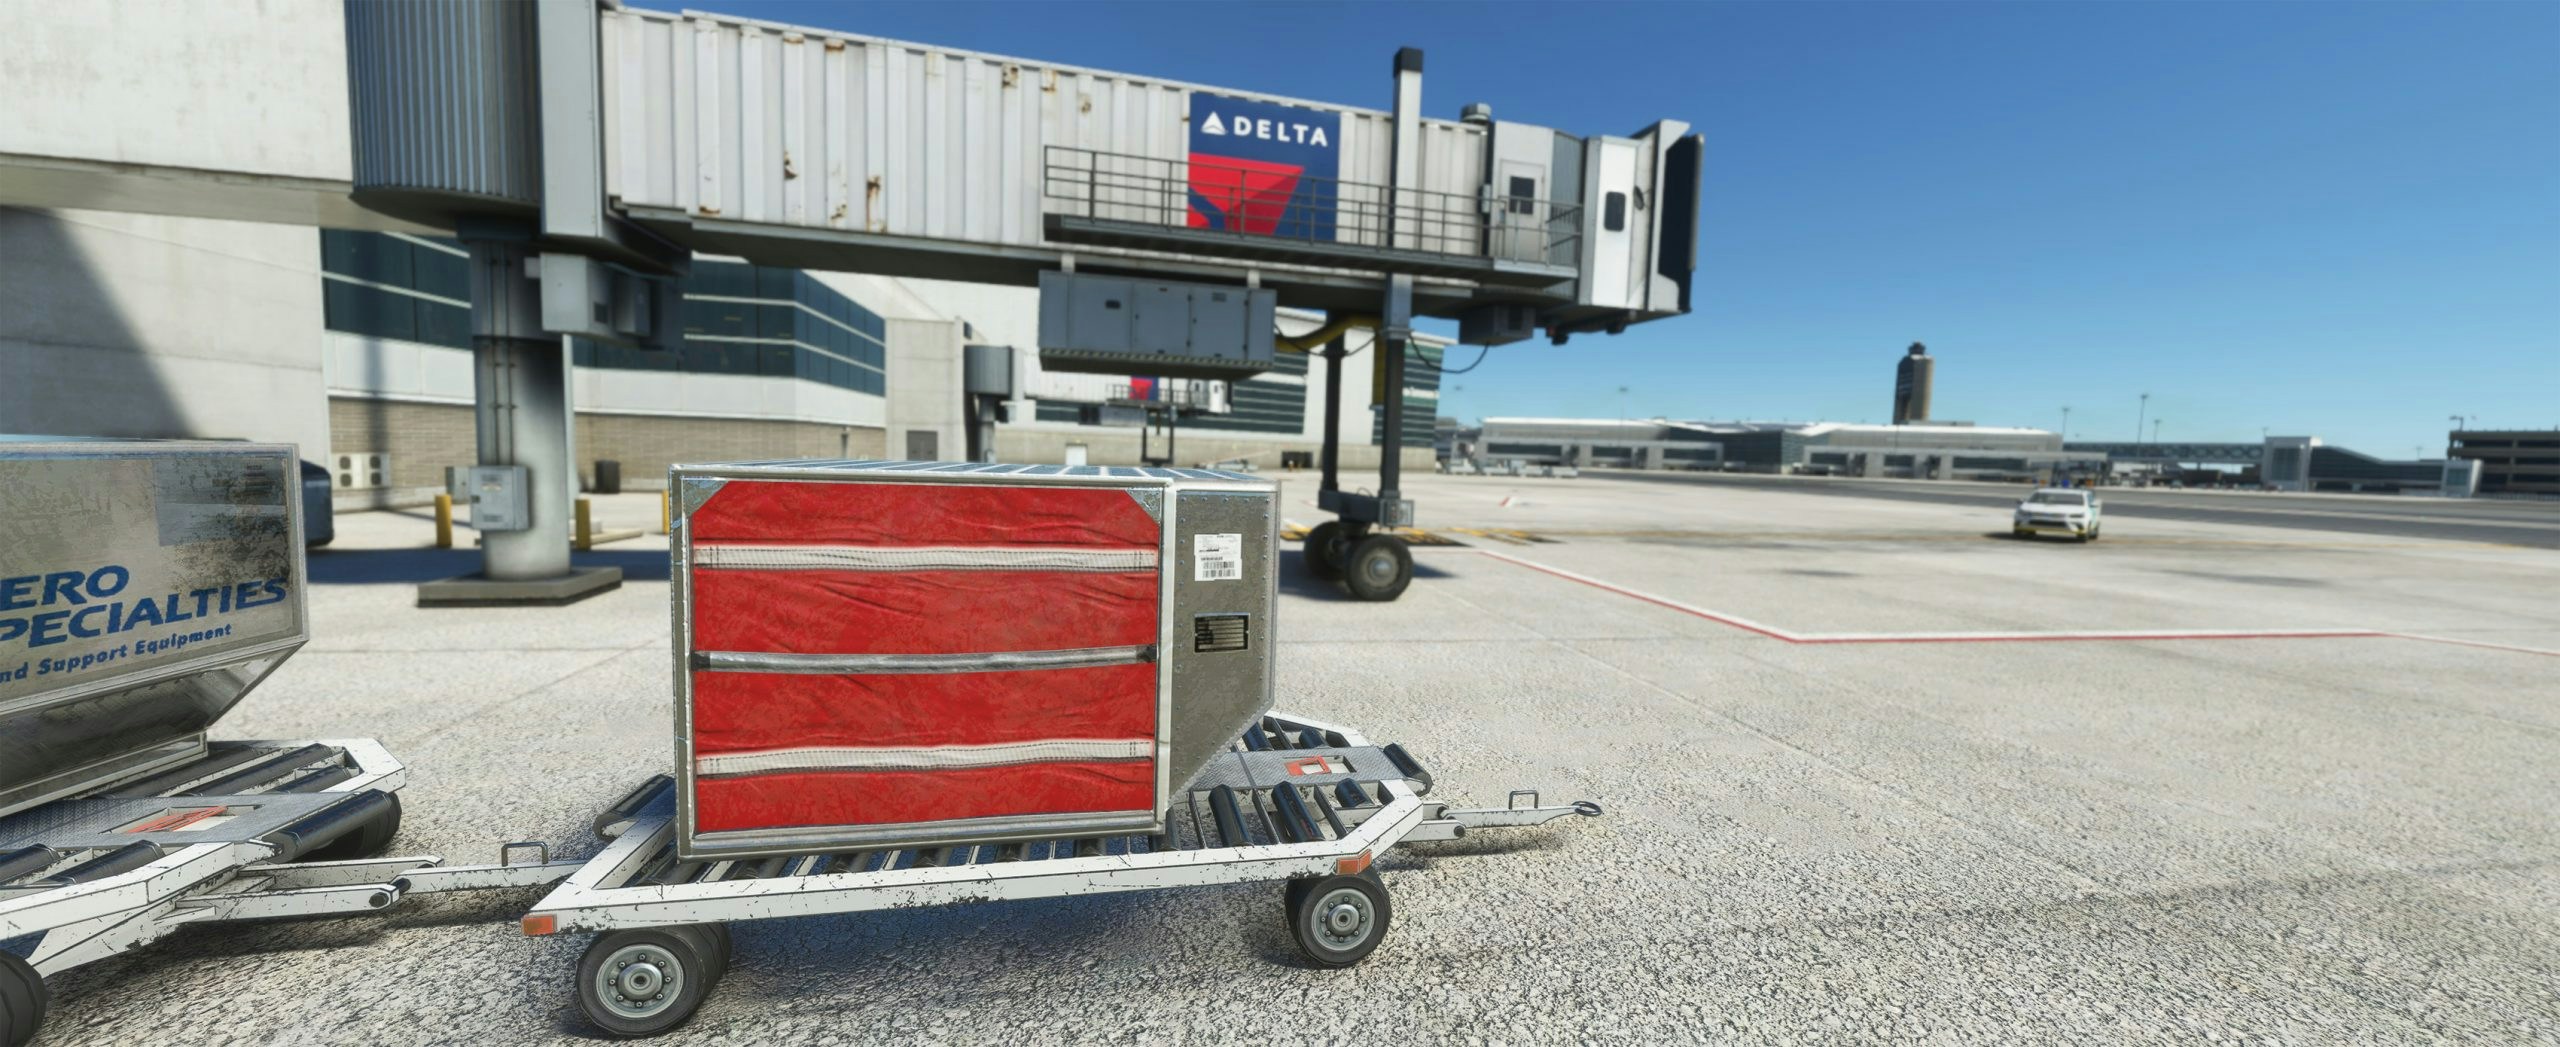 FlyTampa's Boston Logan Airport for MSFS Is Now Available